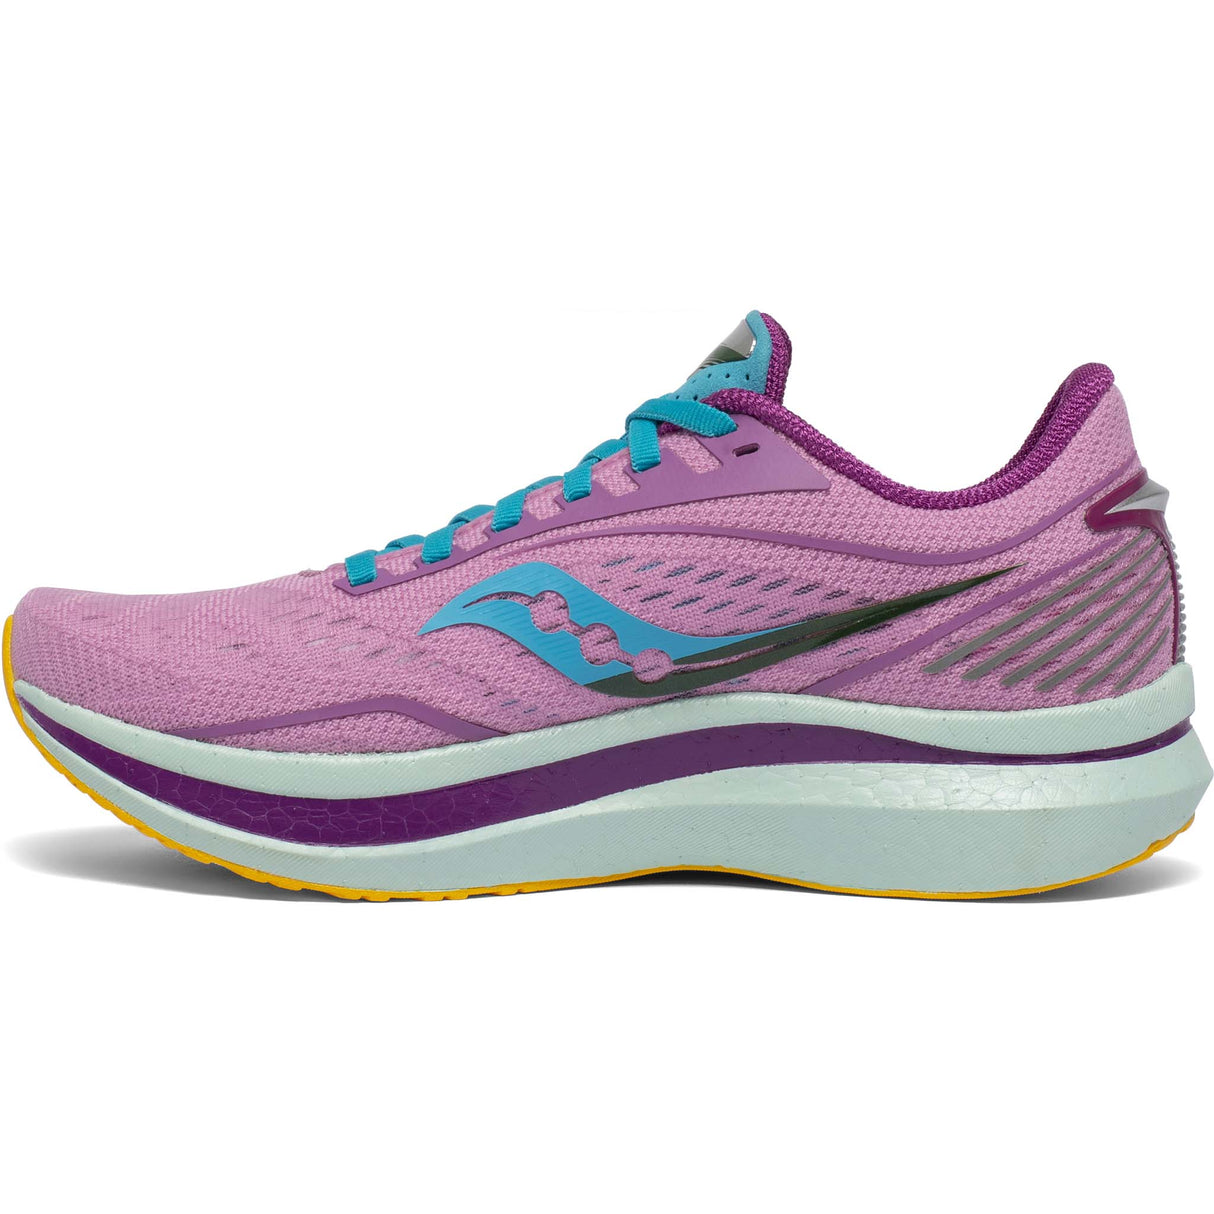 Saucony Endorphin Speed future pink souliers de course femme lateral